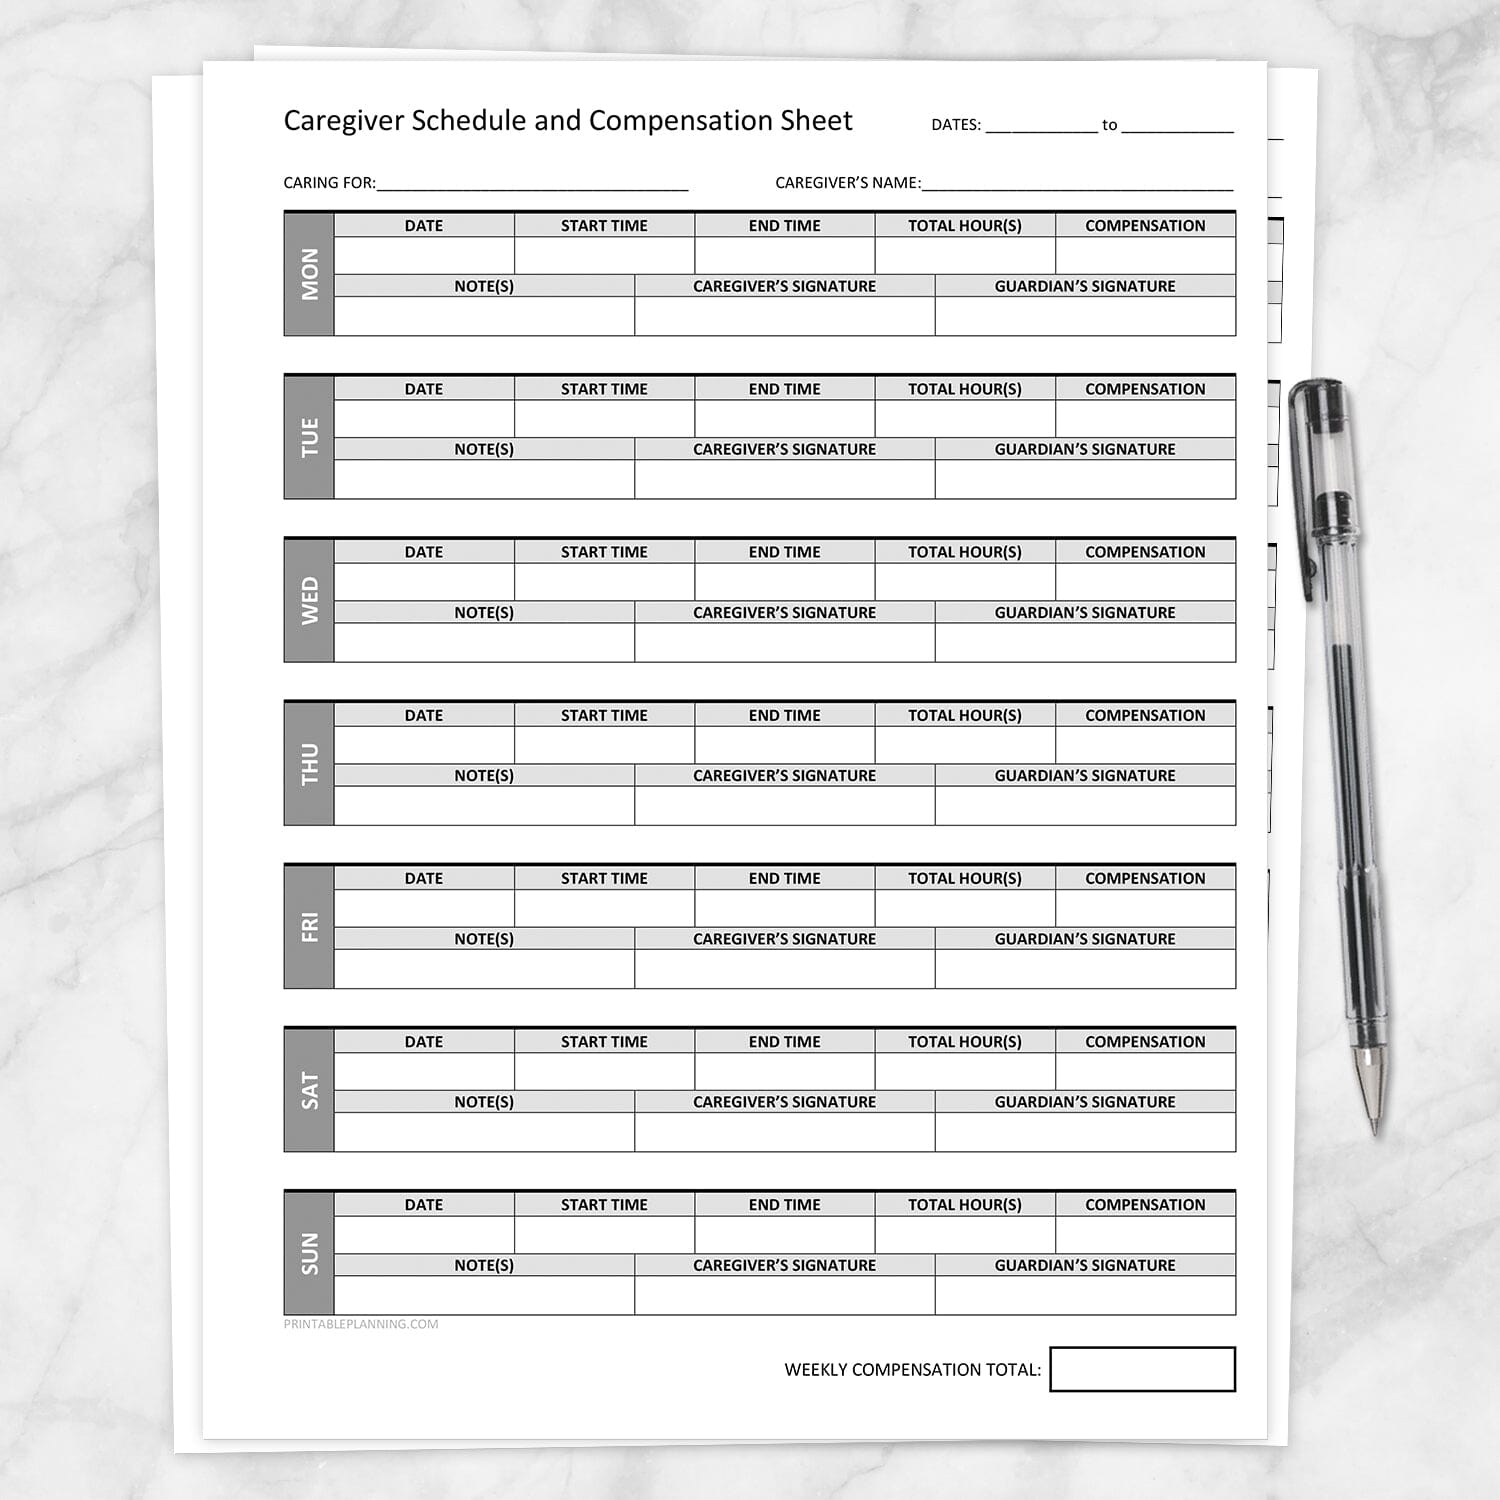 caregiver-schedule-and-compensation-sheet-printable-at-printable